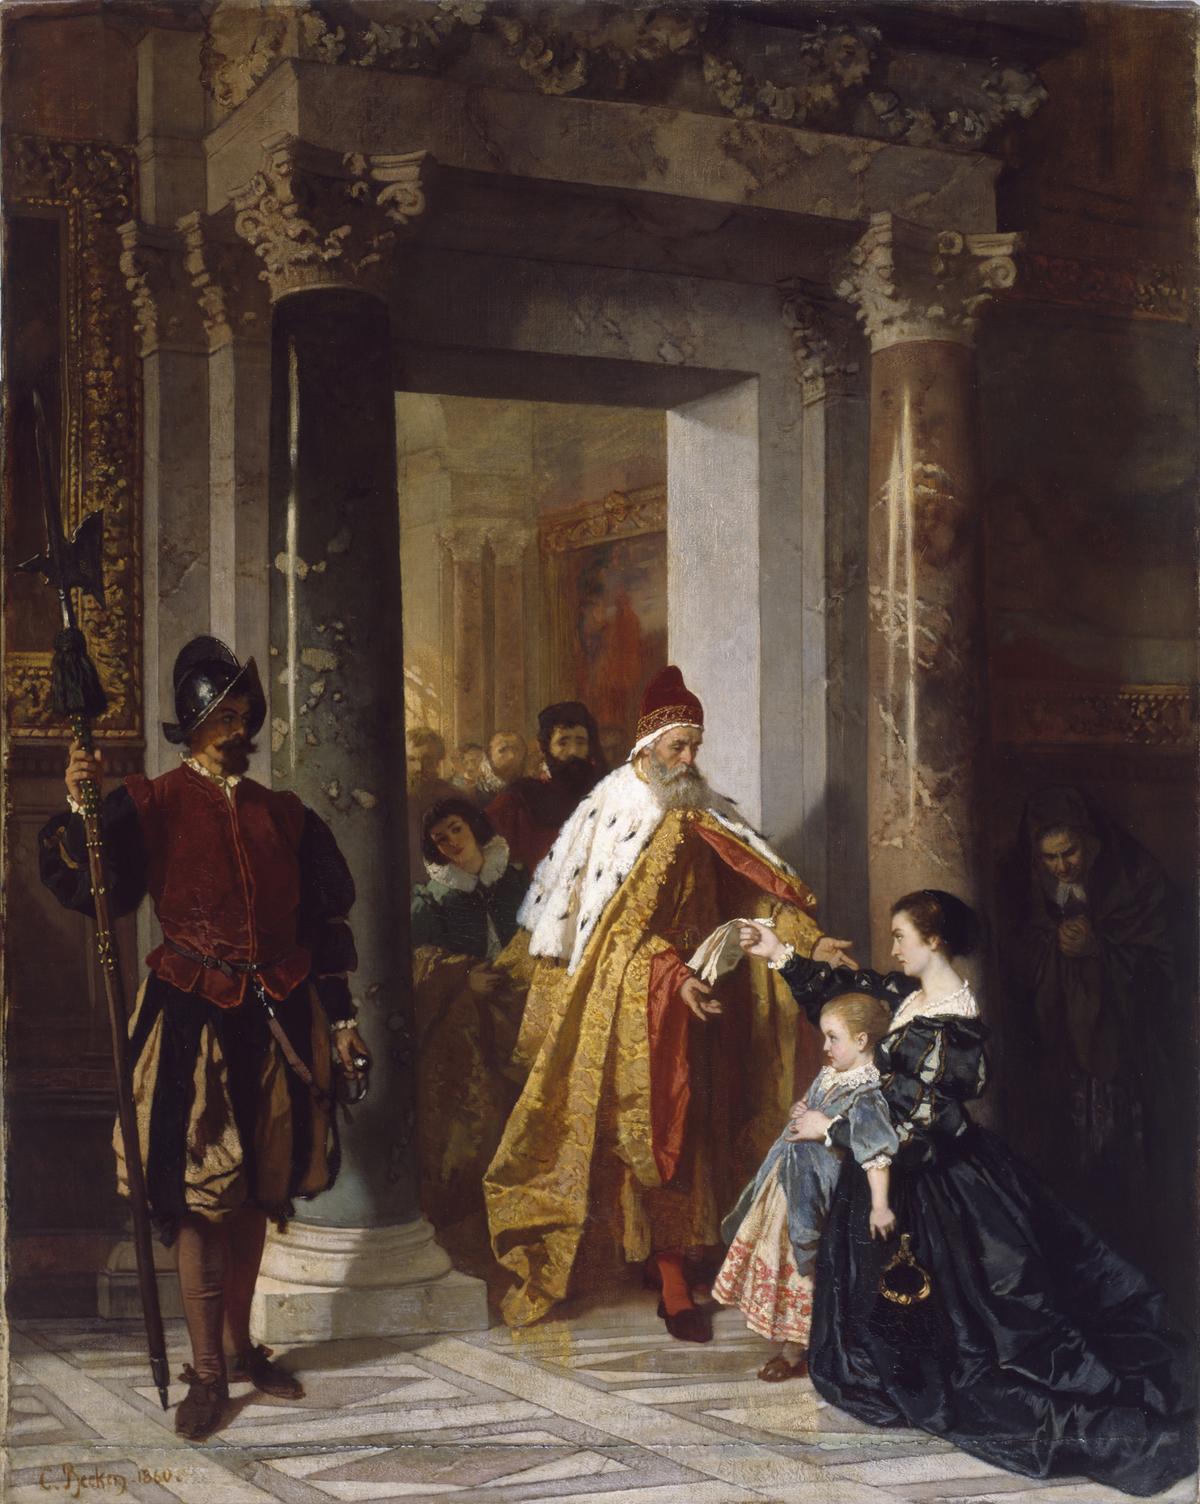 "The Petition to the Doge," 1860, by Karl Becker. Oil on canvas. The Walters Art Museum, Baltimore. (Public Domain)